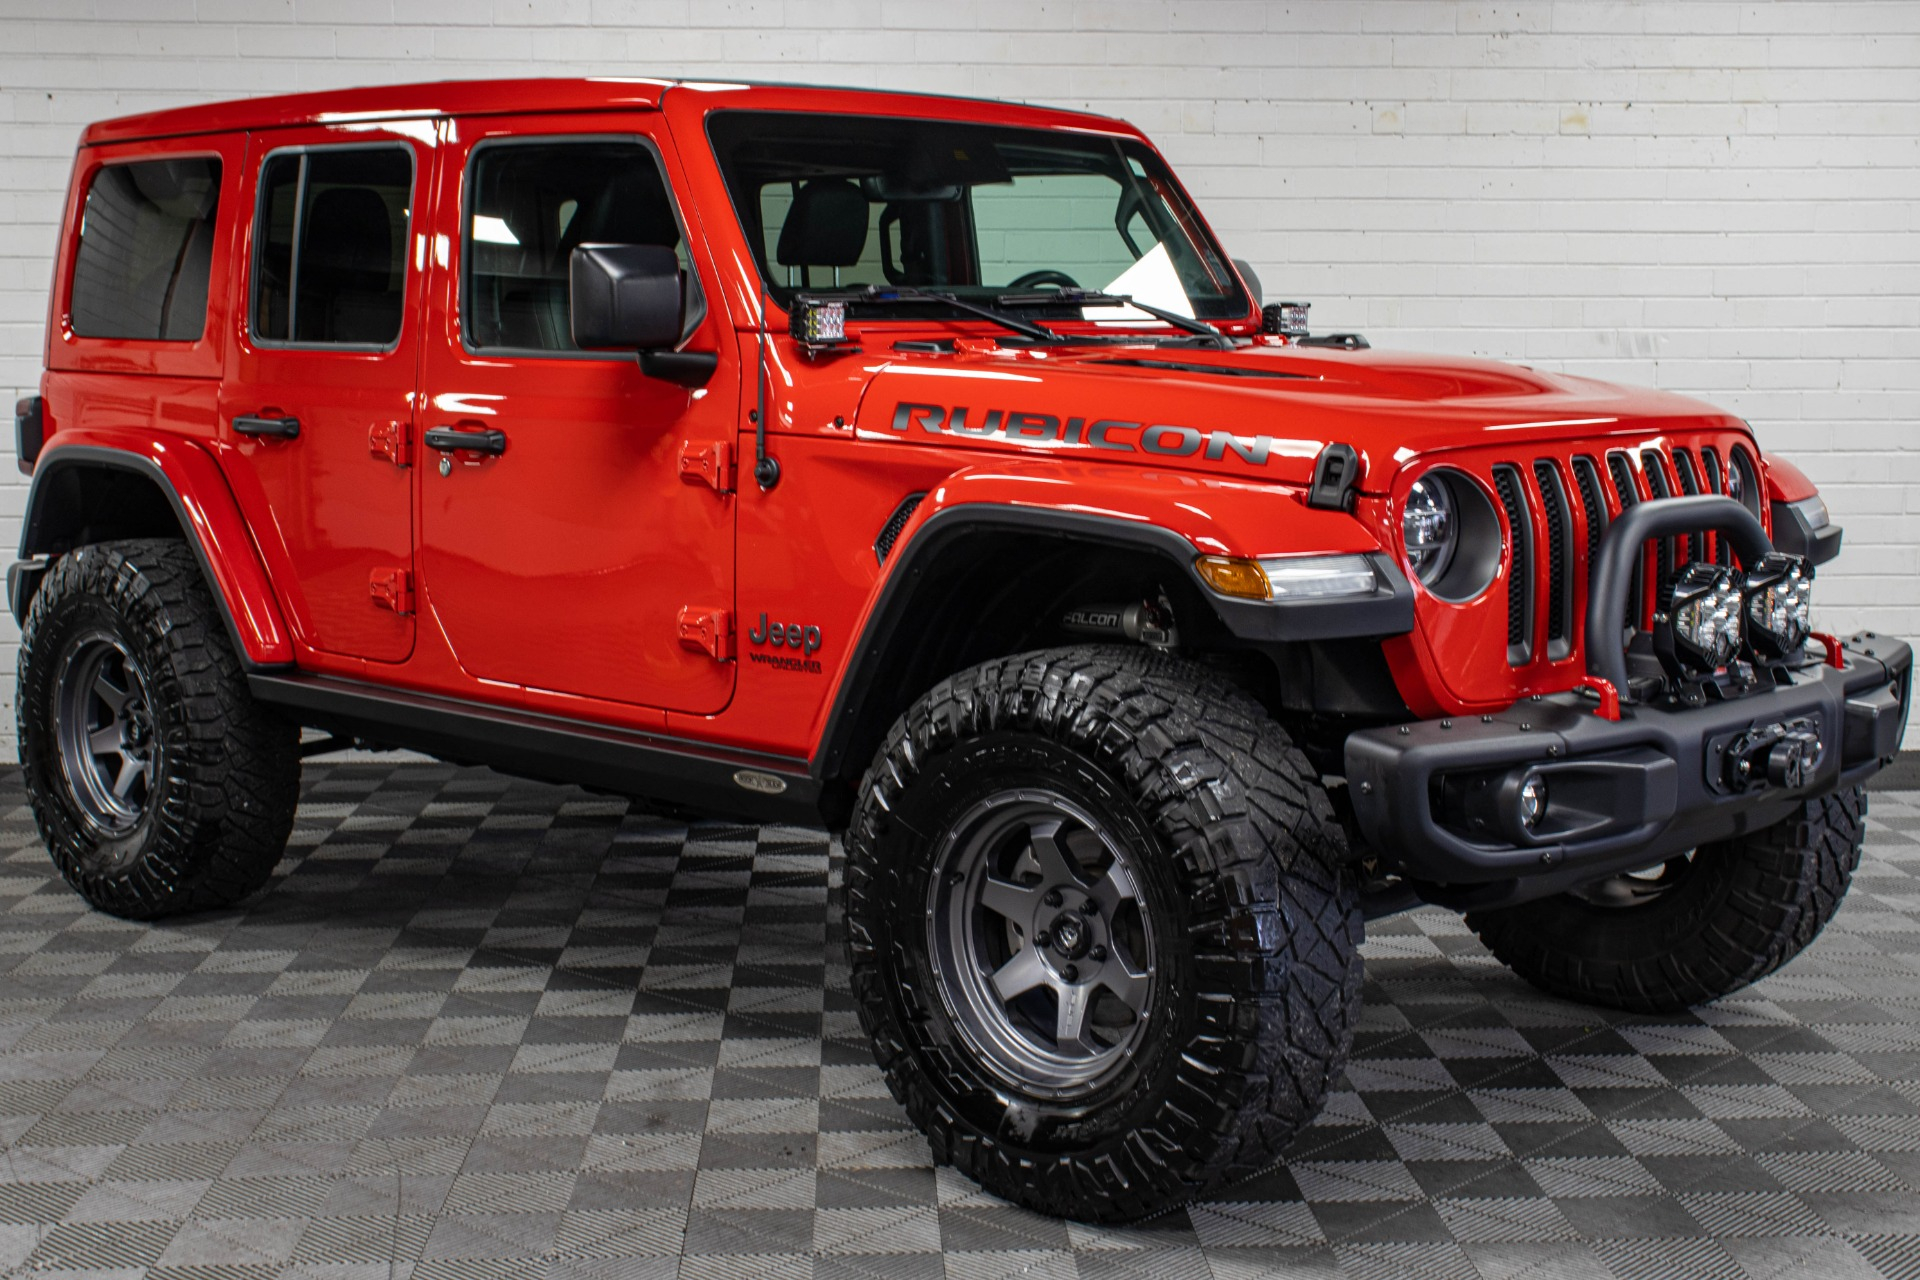 2020 Jeep Wrangler JL Unlimited Rubicon Firecracker Red SOLD!